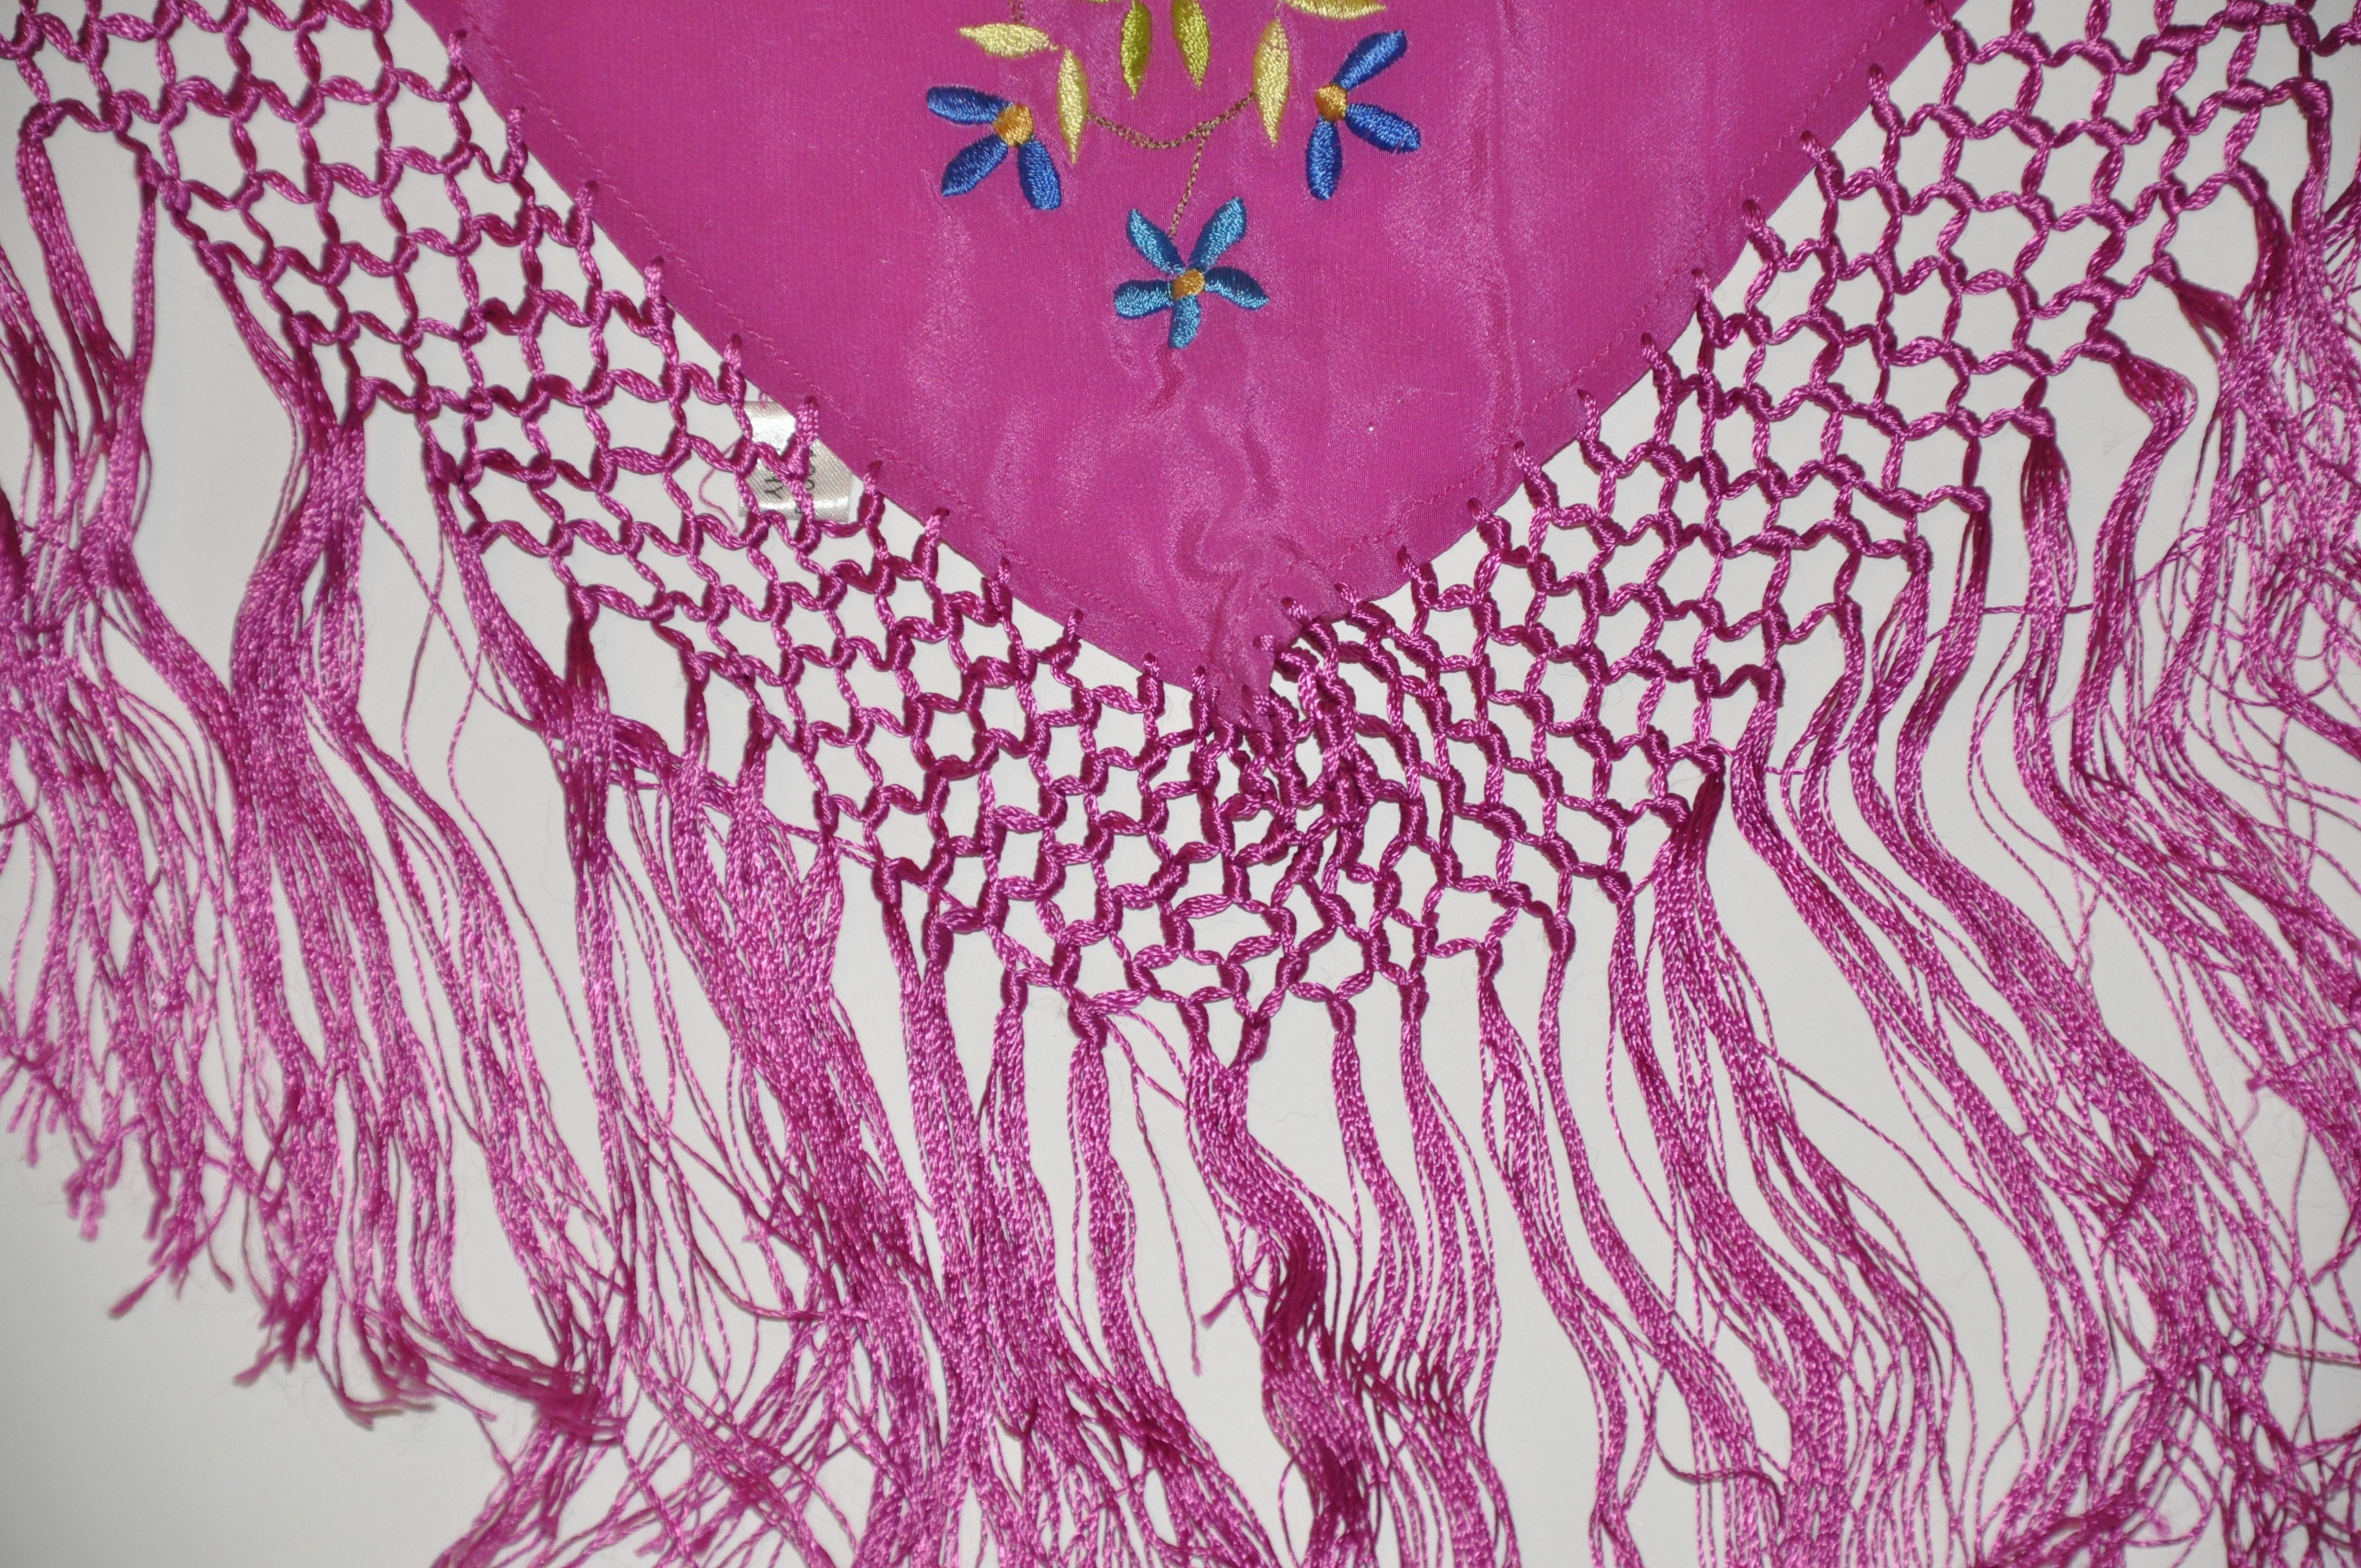        This wonderfully bold fuchsia silk scarf is detailed with bursts of multi-color hand-embroidered florals of multiple sizes, and accented with a multi-tier hand-knotted silk cord highlighting the fringe measuring 6 1/2 inches in length. The